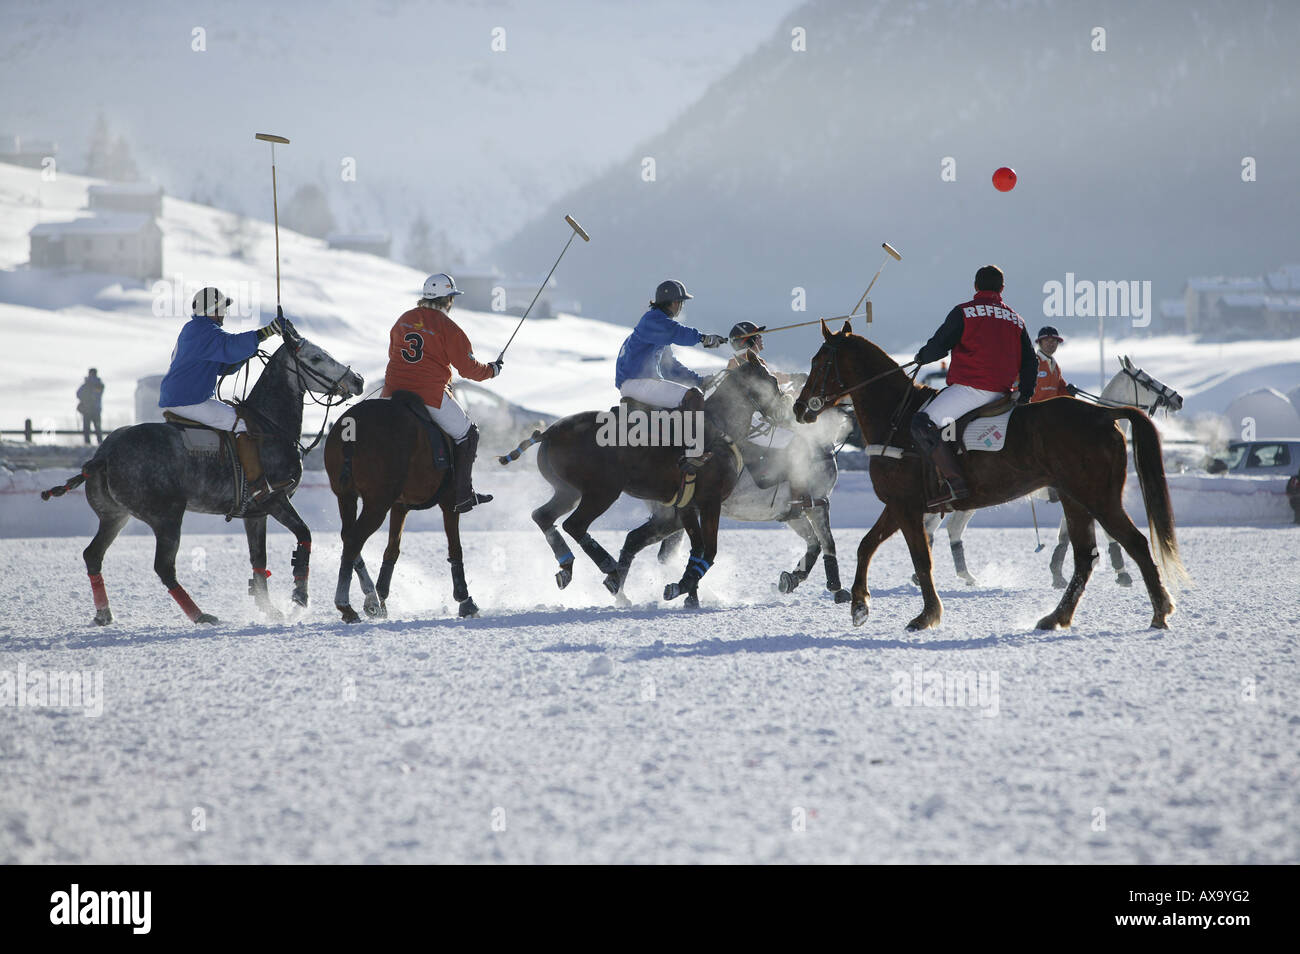 Playing polo in the snow, International tournament in Livigno, Italy Stock Photo